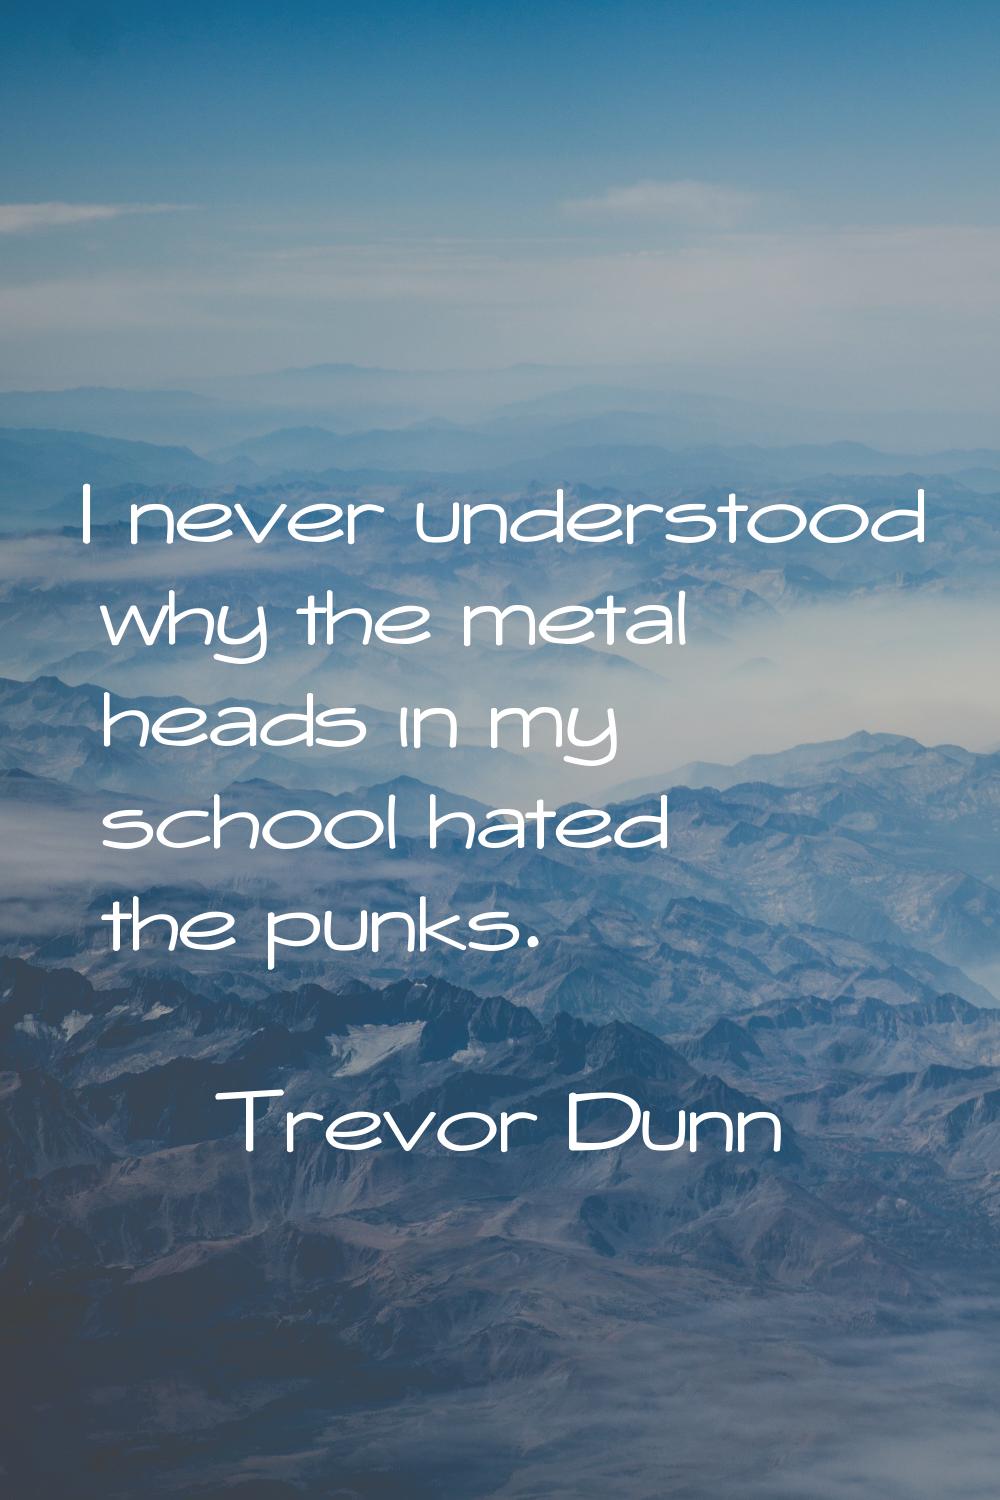 I never understood why the metal heads in my school hated the punks.